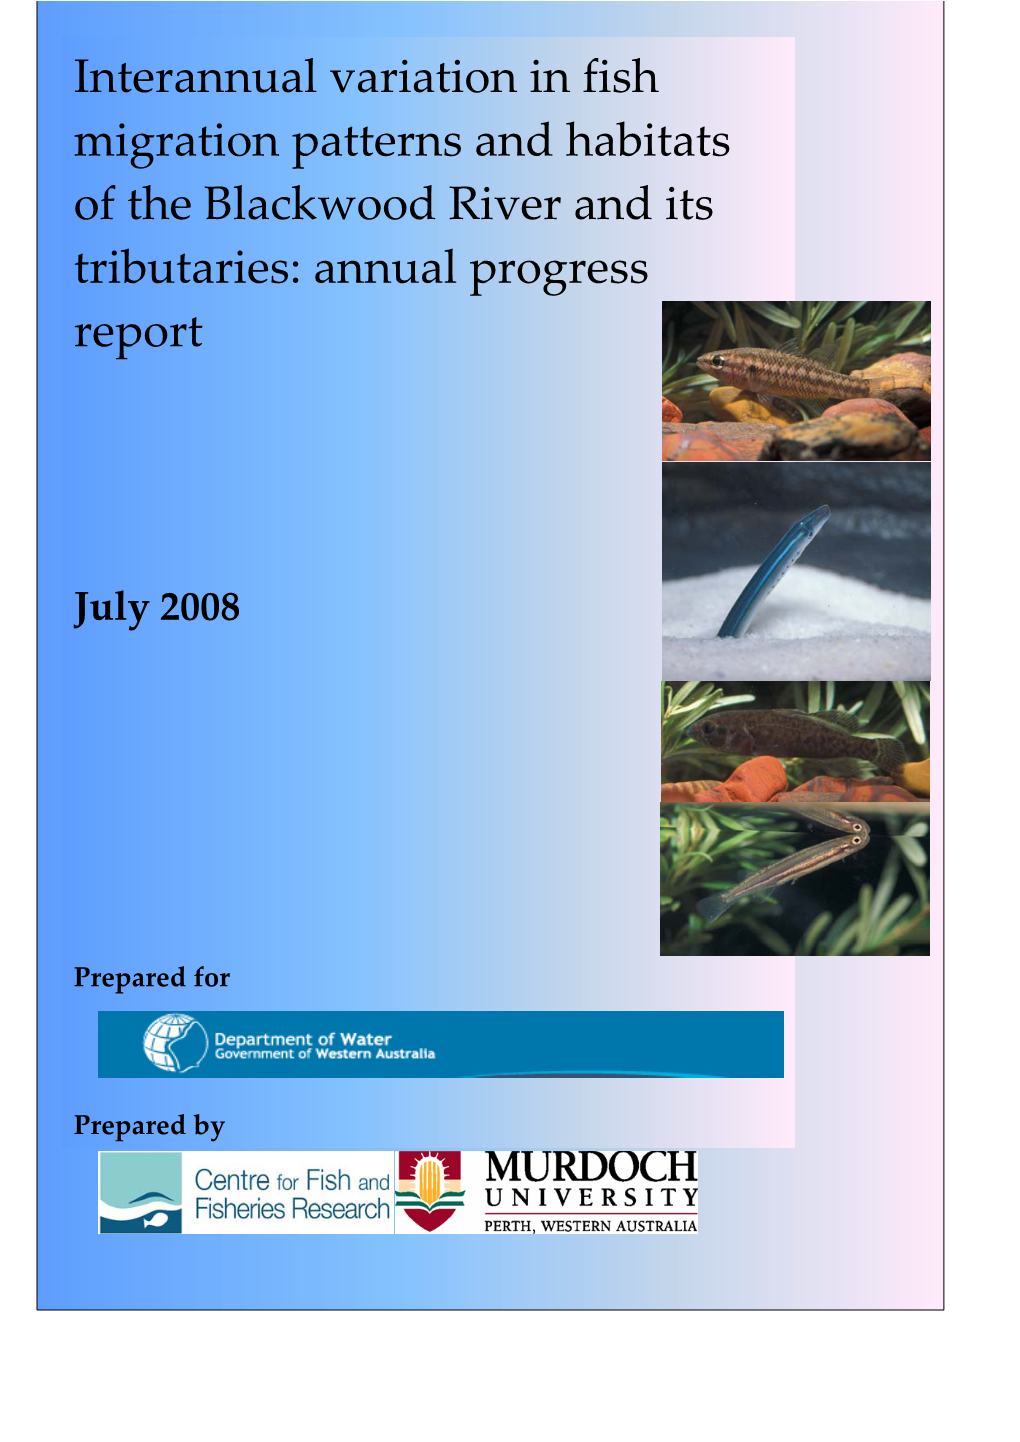 Interannual Variation in Fish Migration Patterns and Habitats of the Blackwood River and Its Tributaries: Annual Progress Report